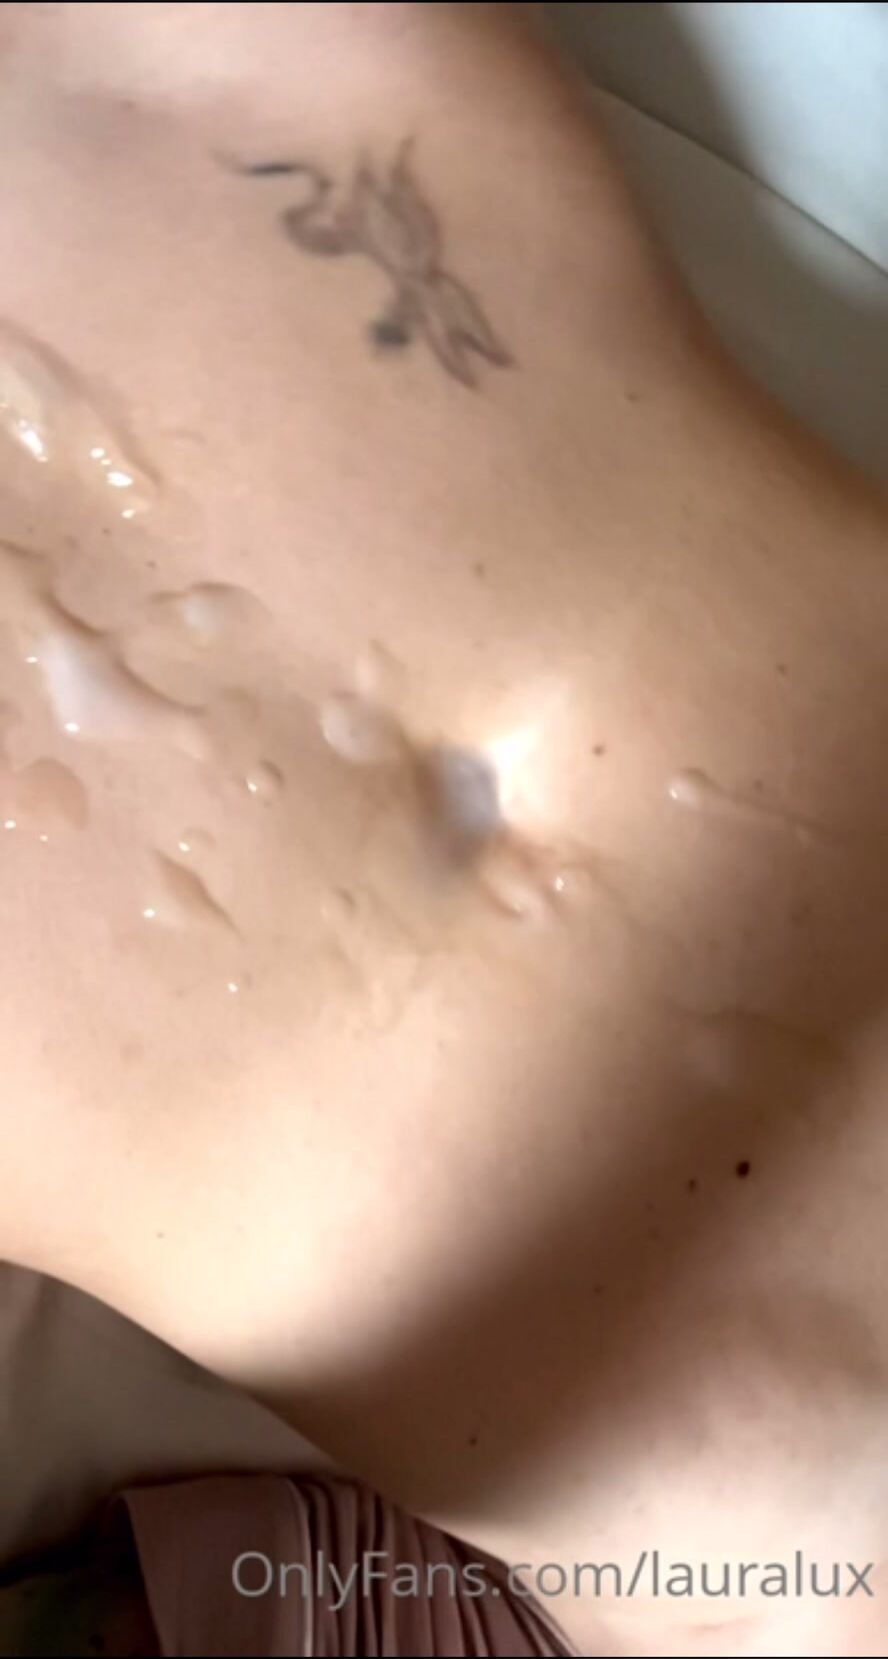 Laura Lux covered in cum - Thothub